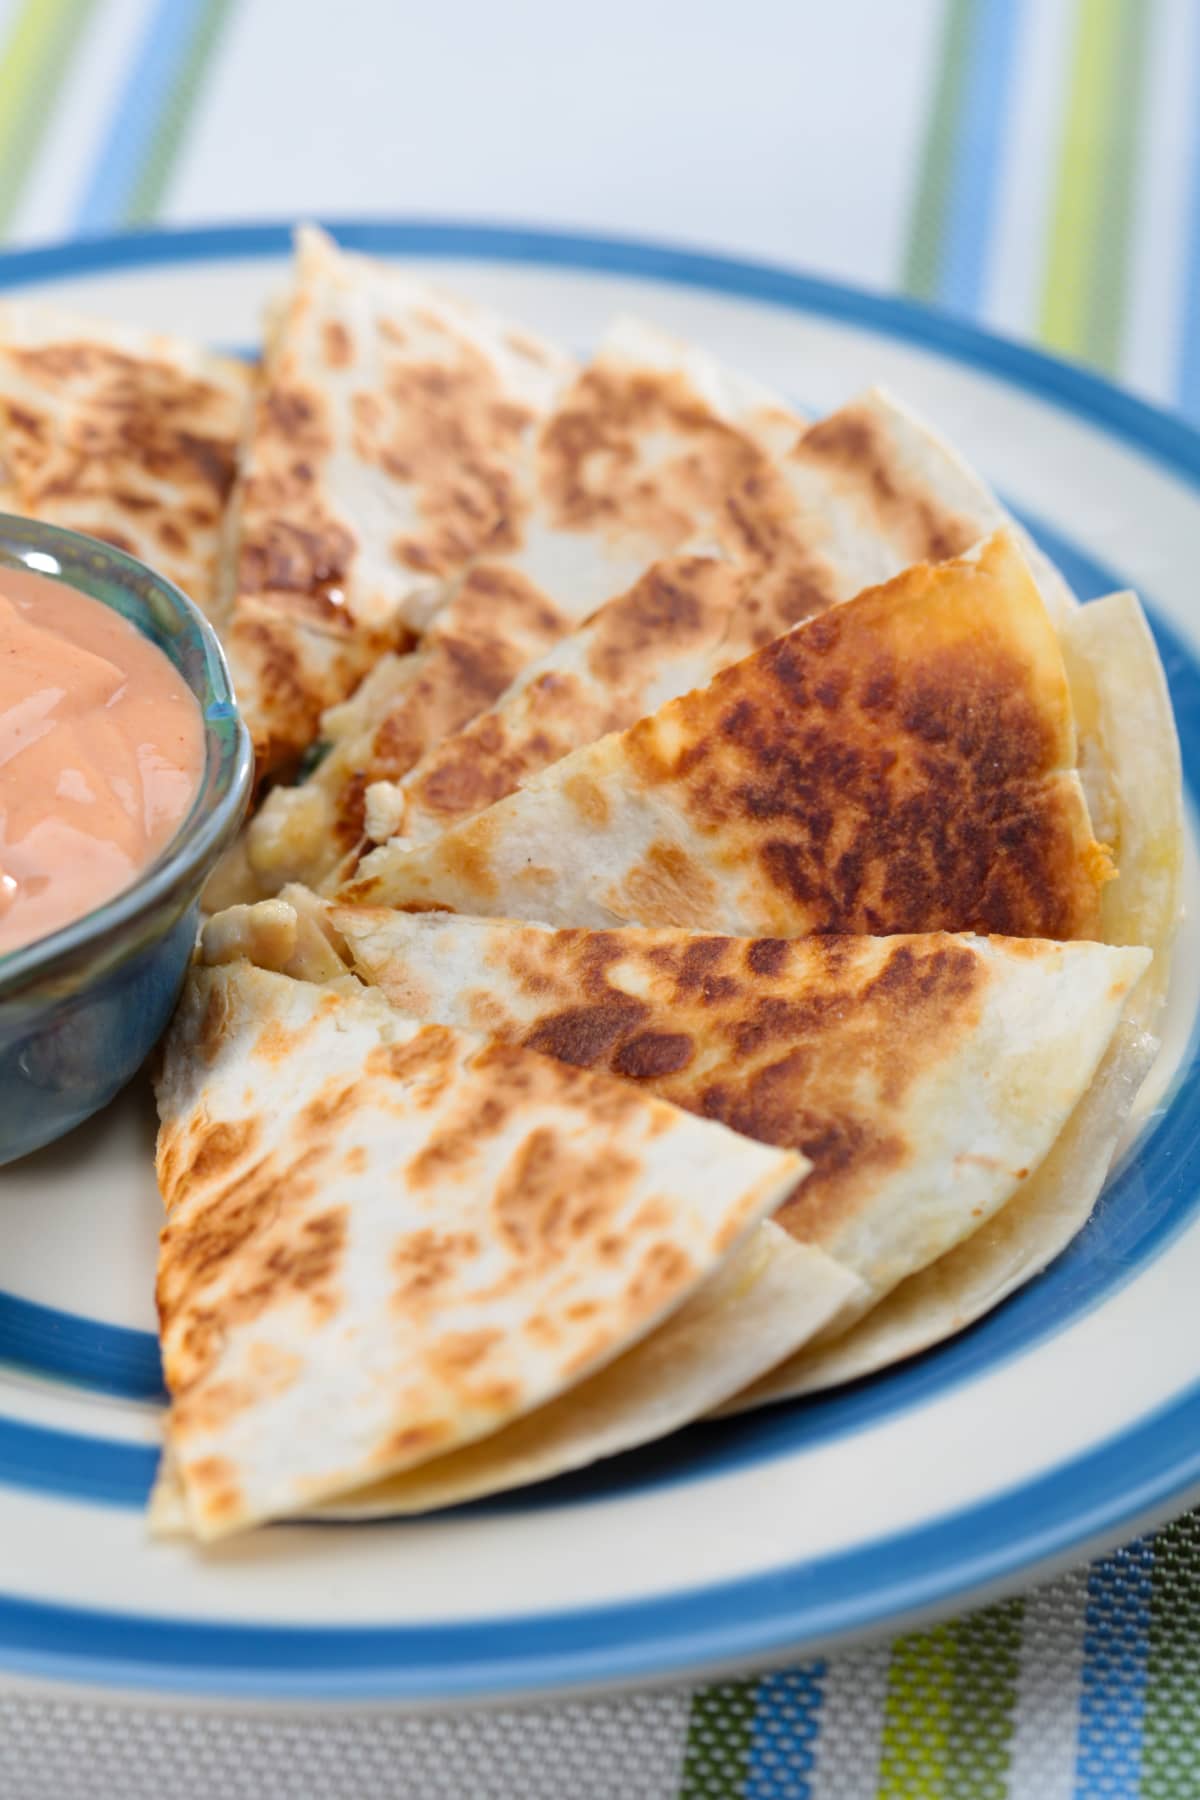 Sliced quesadilla on plate with bowl of sauce